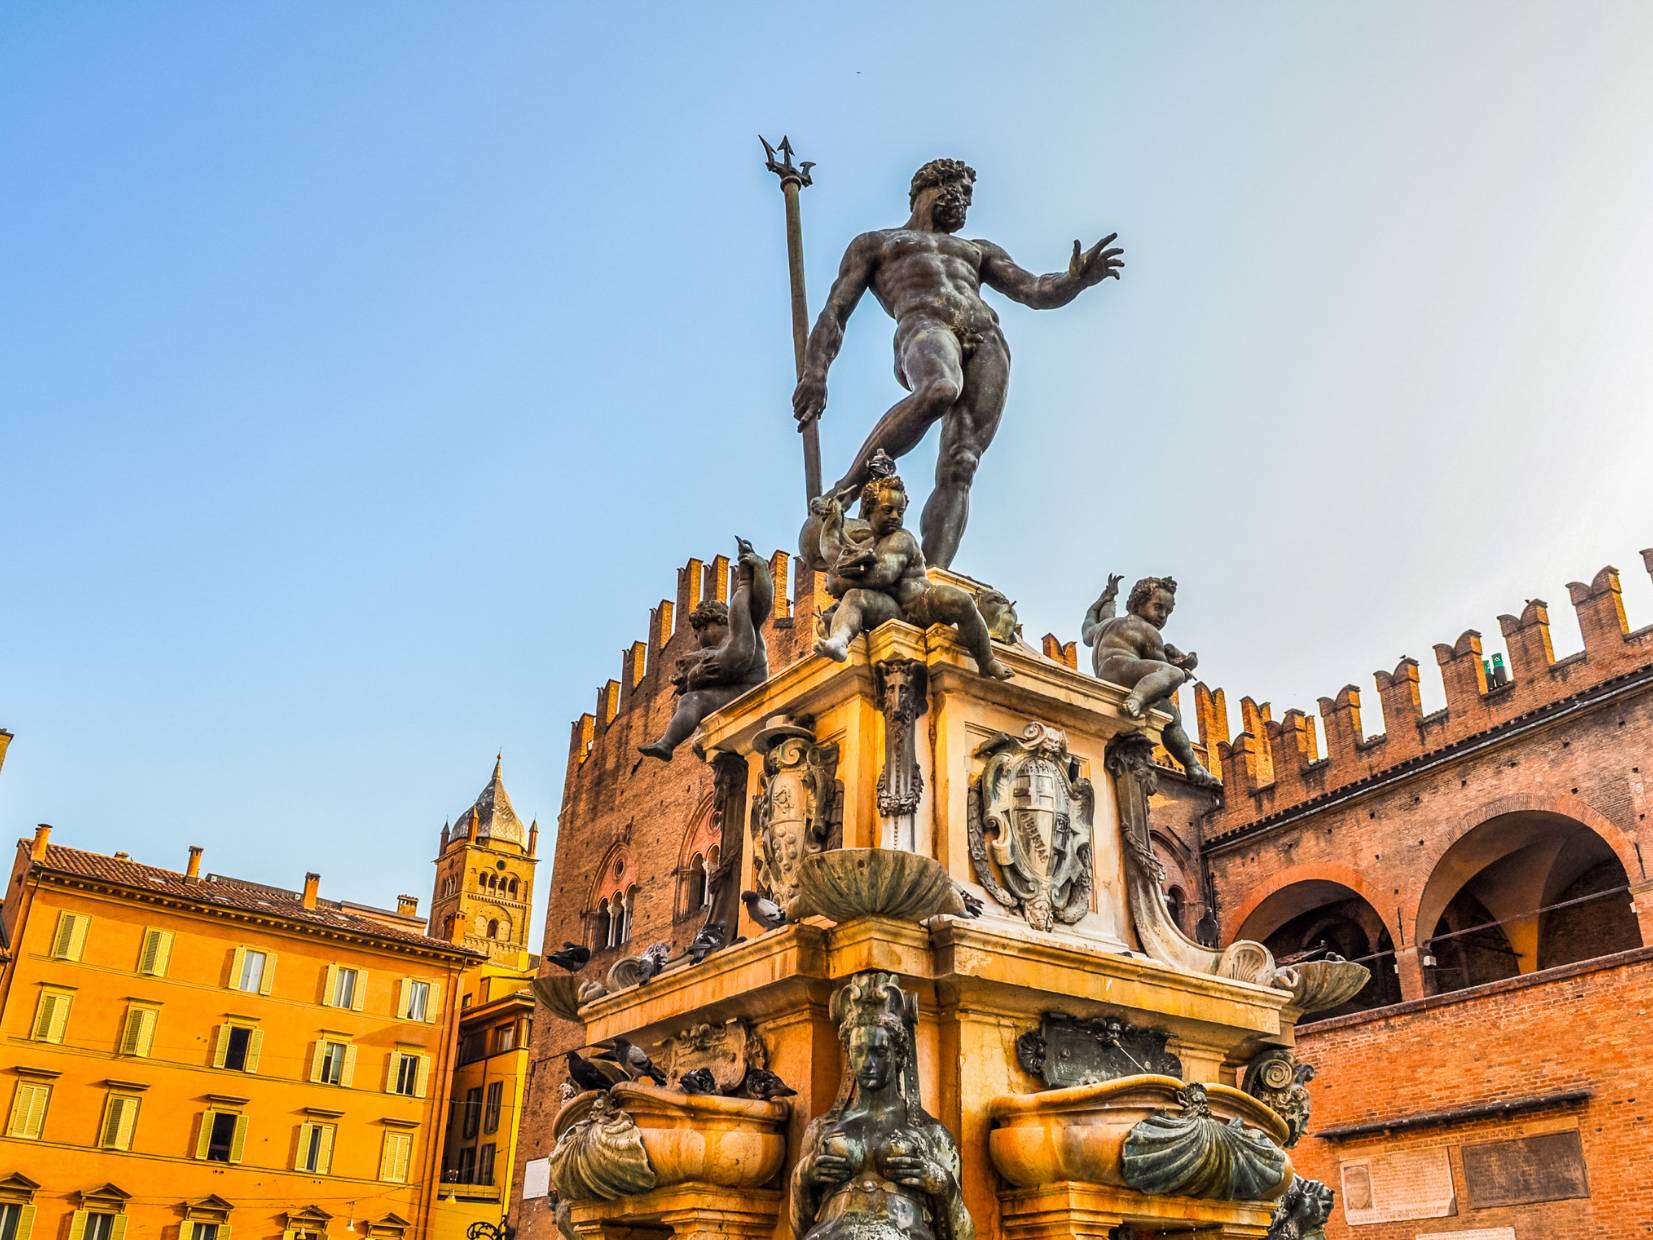 An image showing the main fountain of Bologna